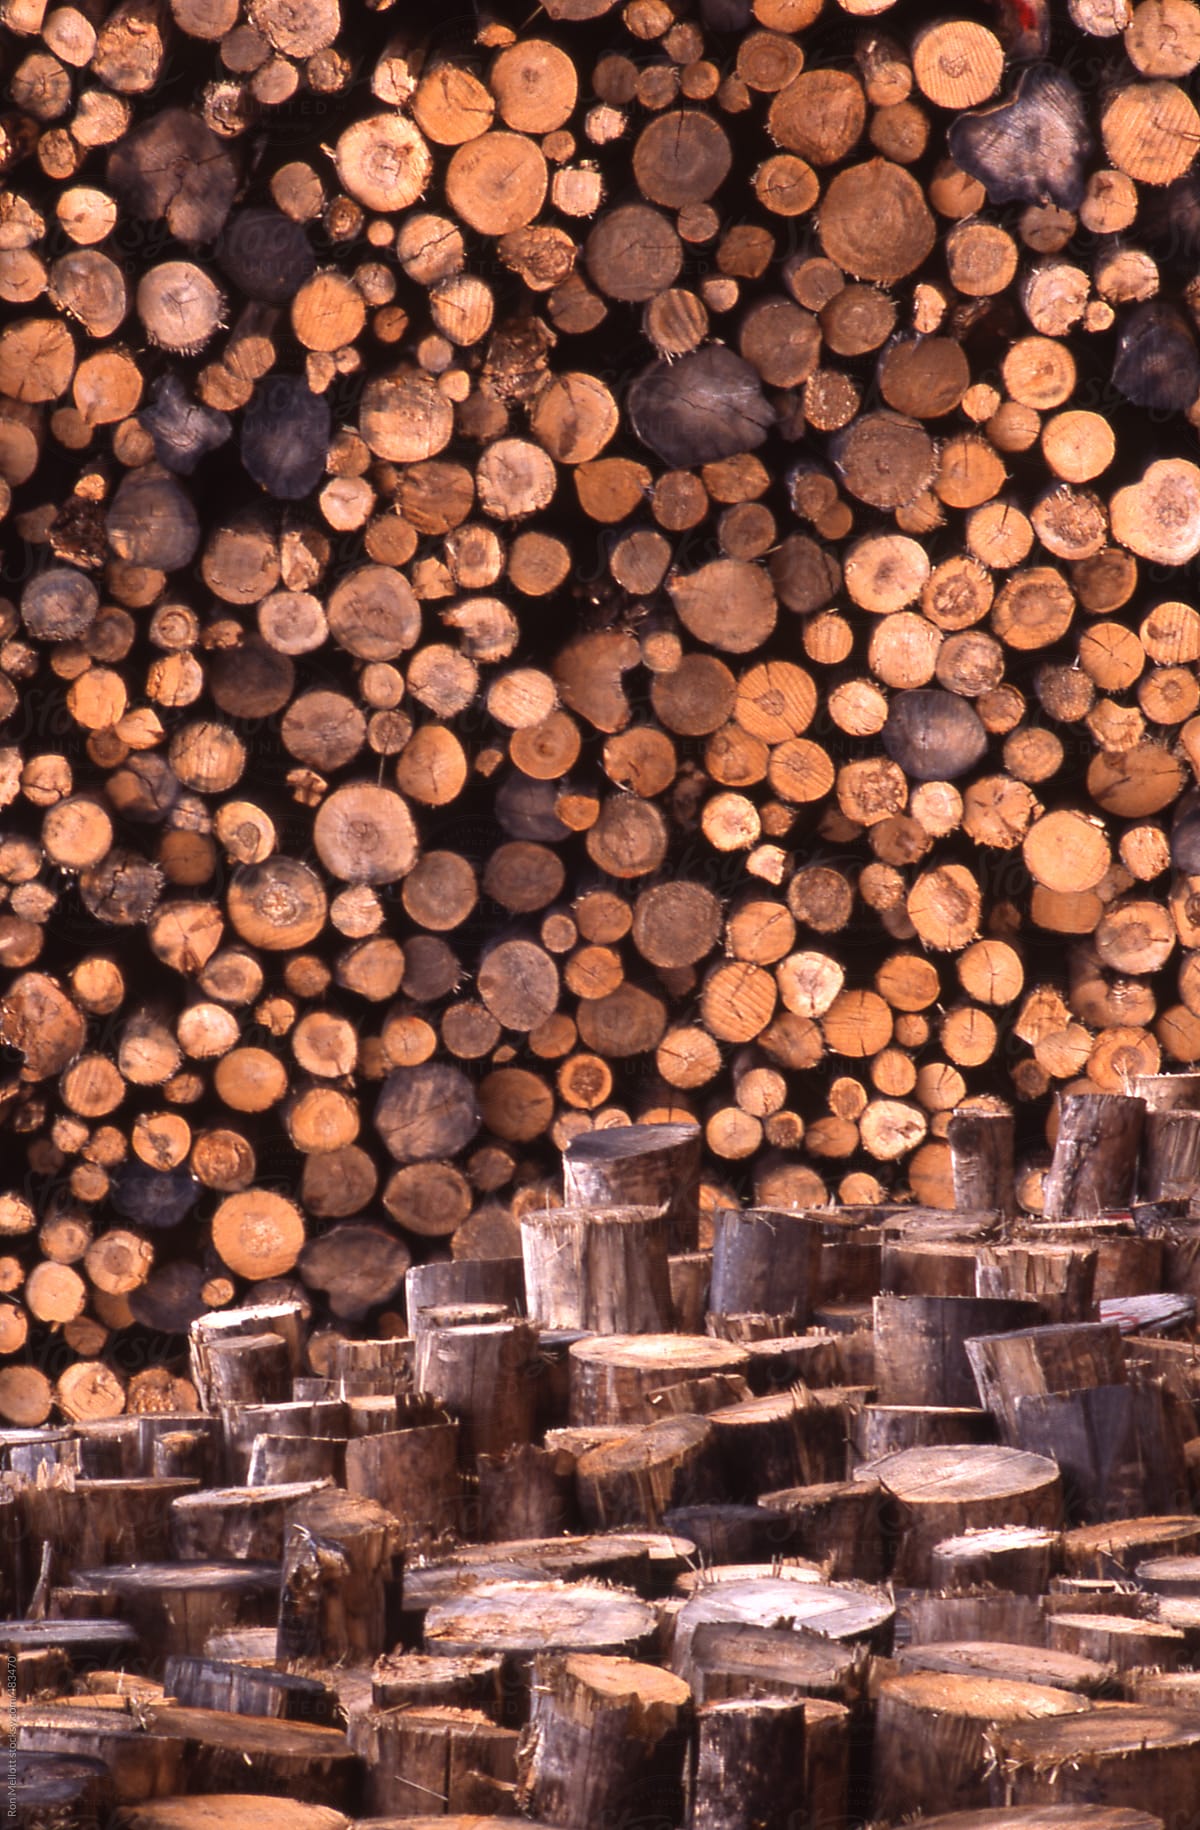 timber trees stacked in a lumber yard awaiting processing